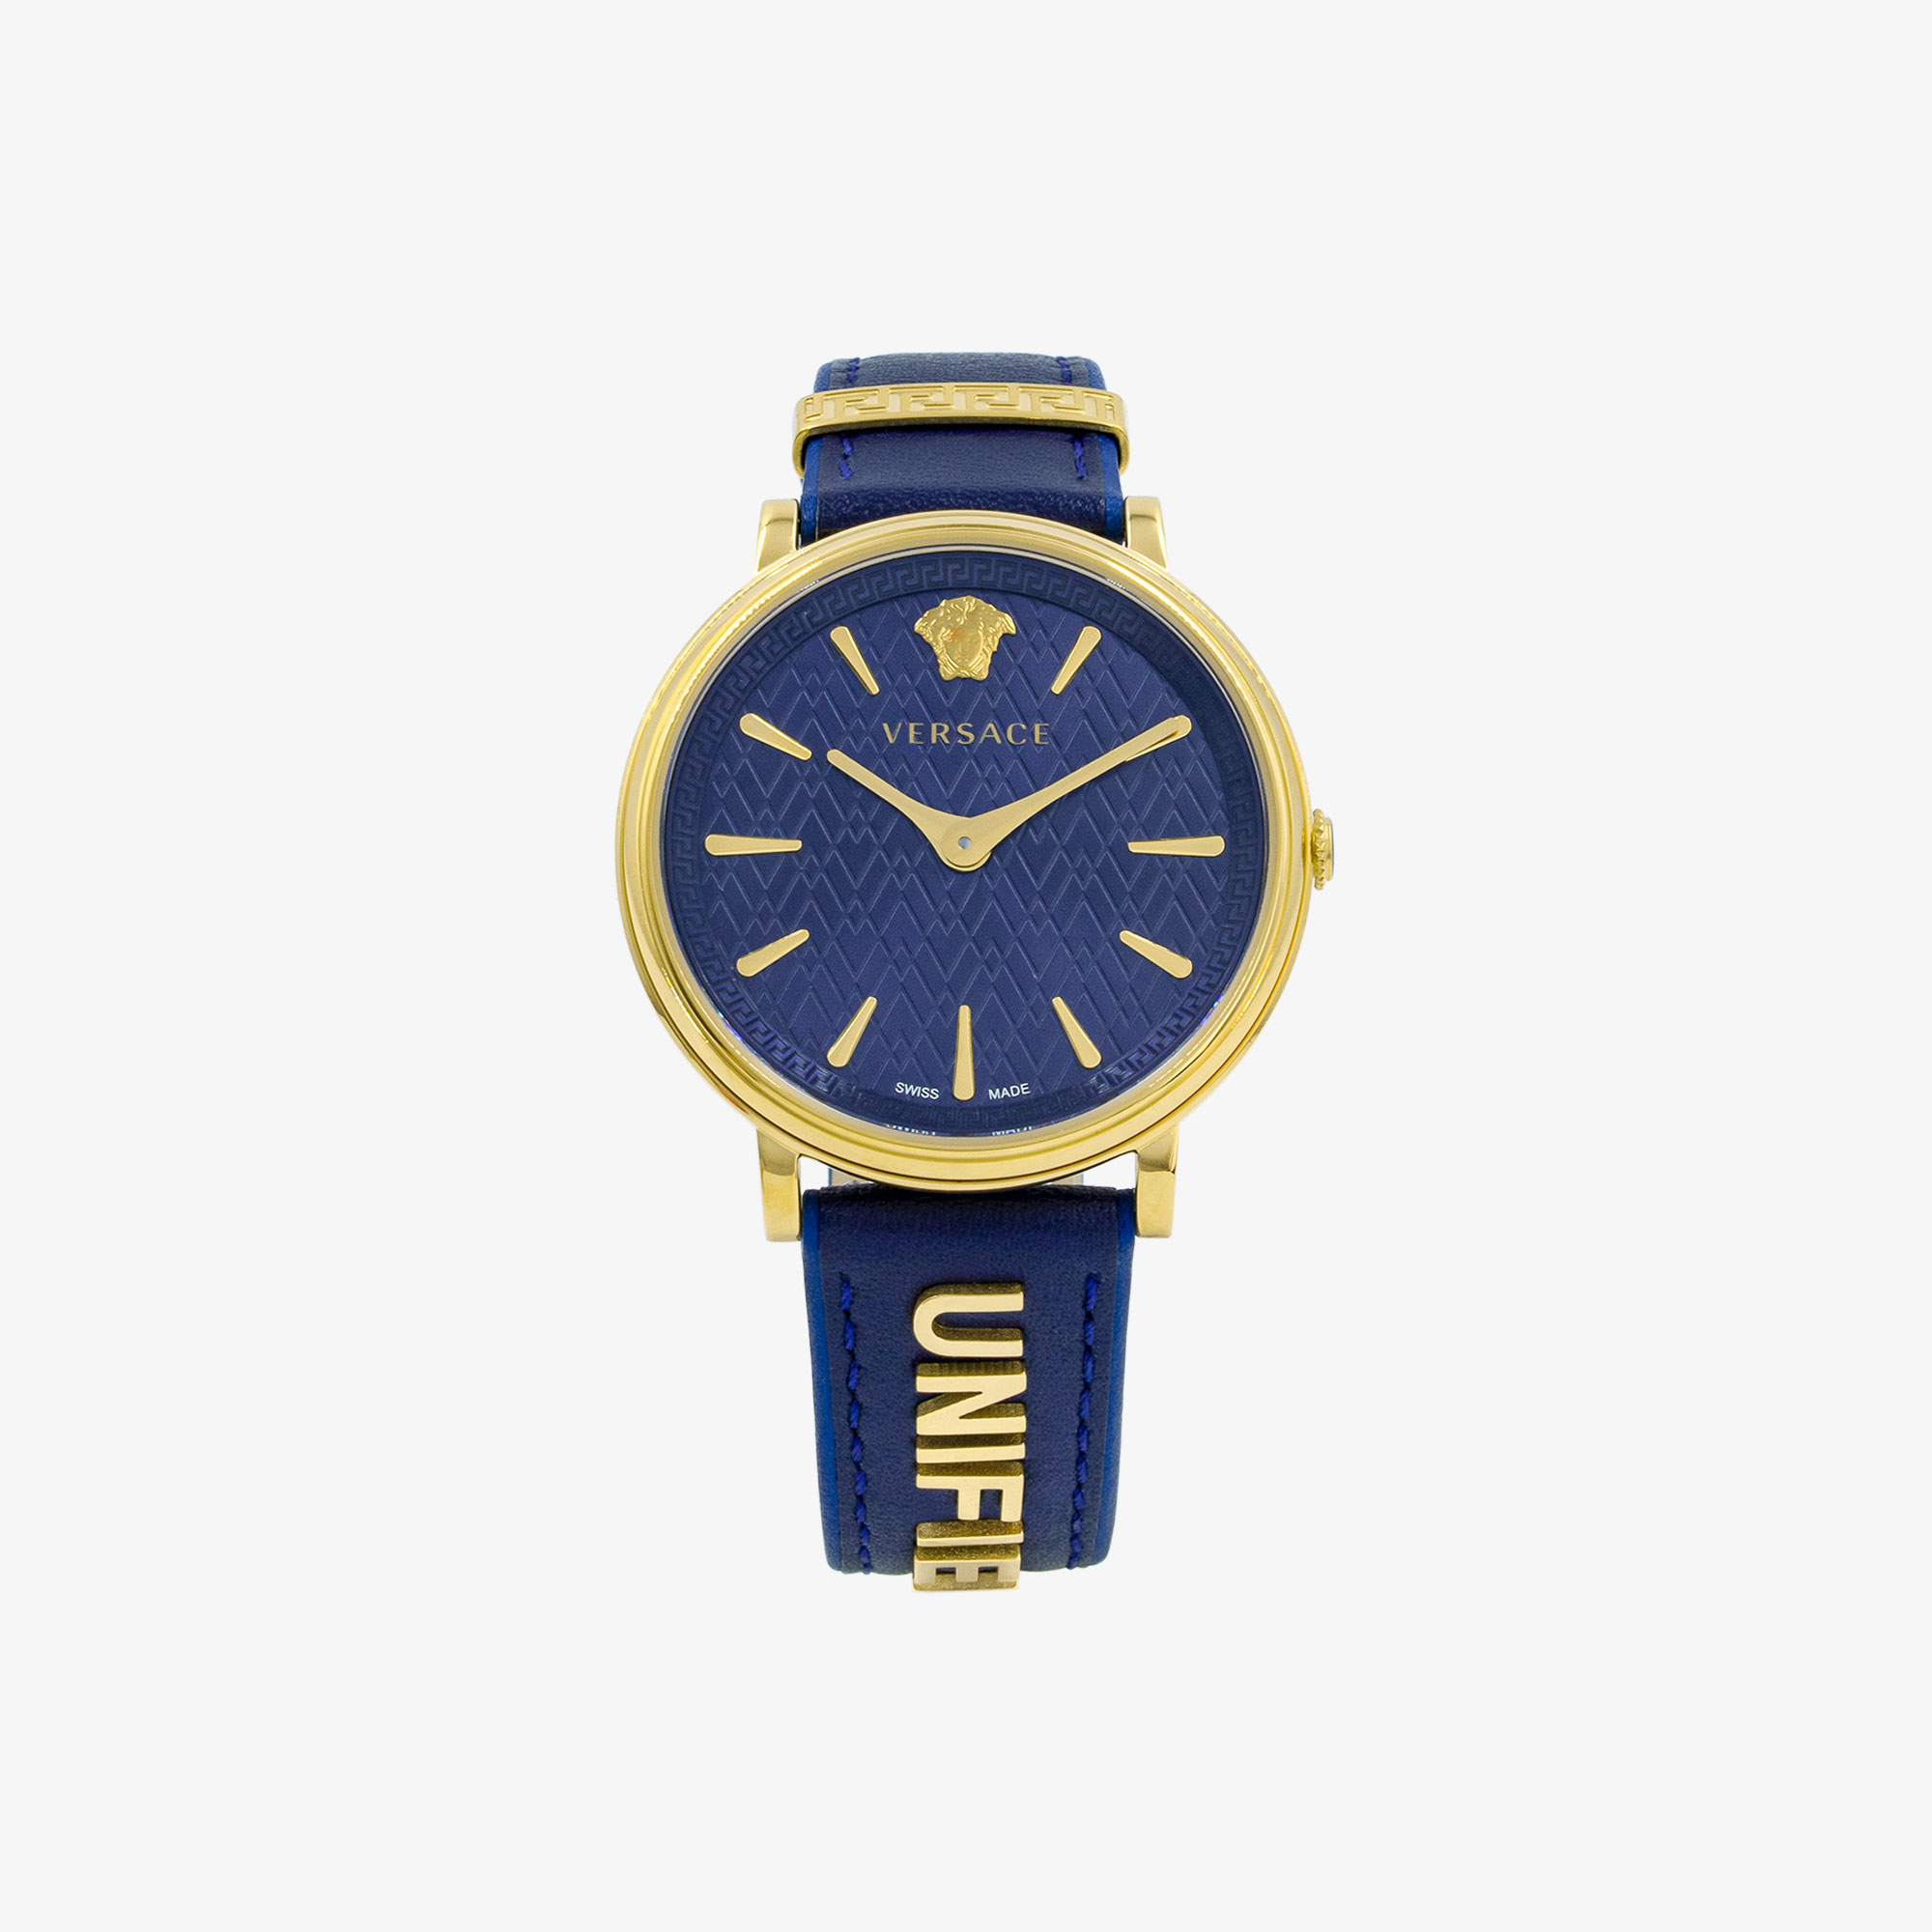 VERSACE V-CIRCLE WATCH WITH BLUE LEATHER STRAP